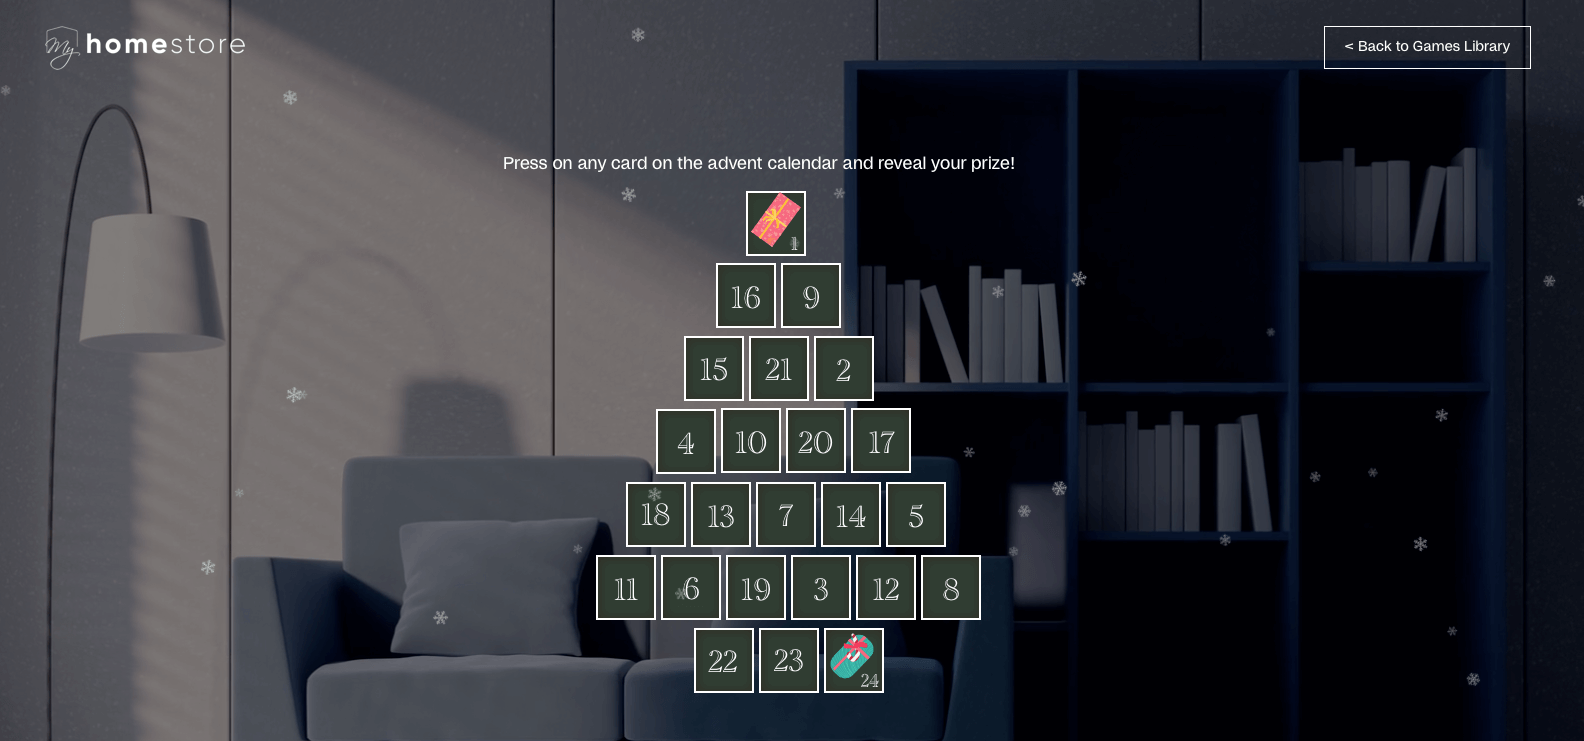 Example of an advent calendar, made for the Games Library of Playable, the gamification platform for marketers